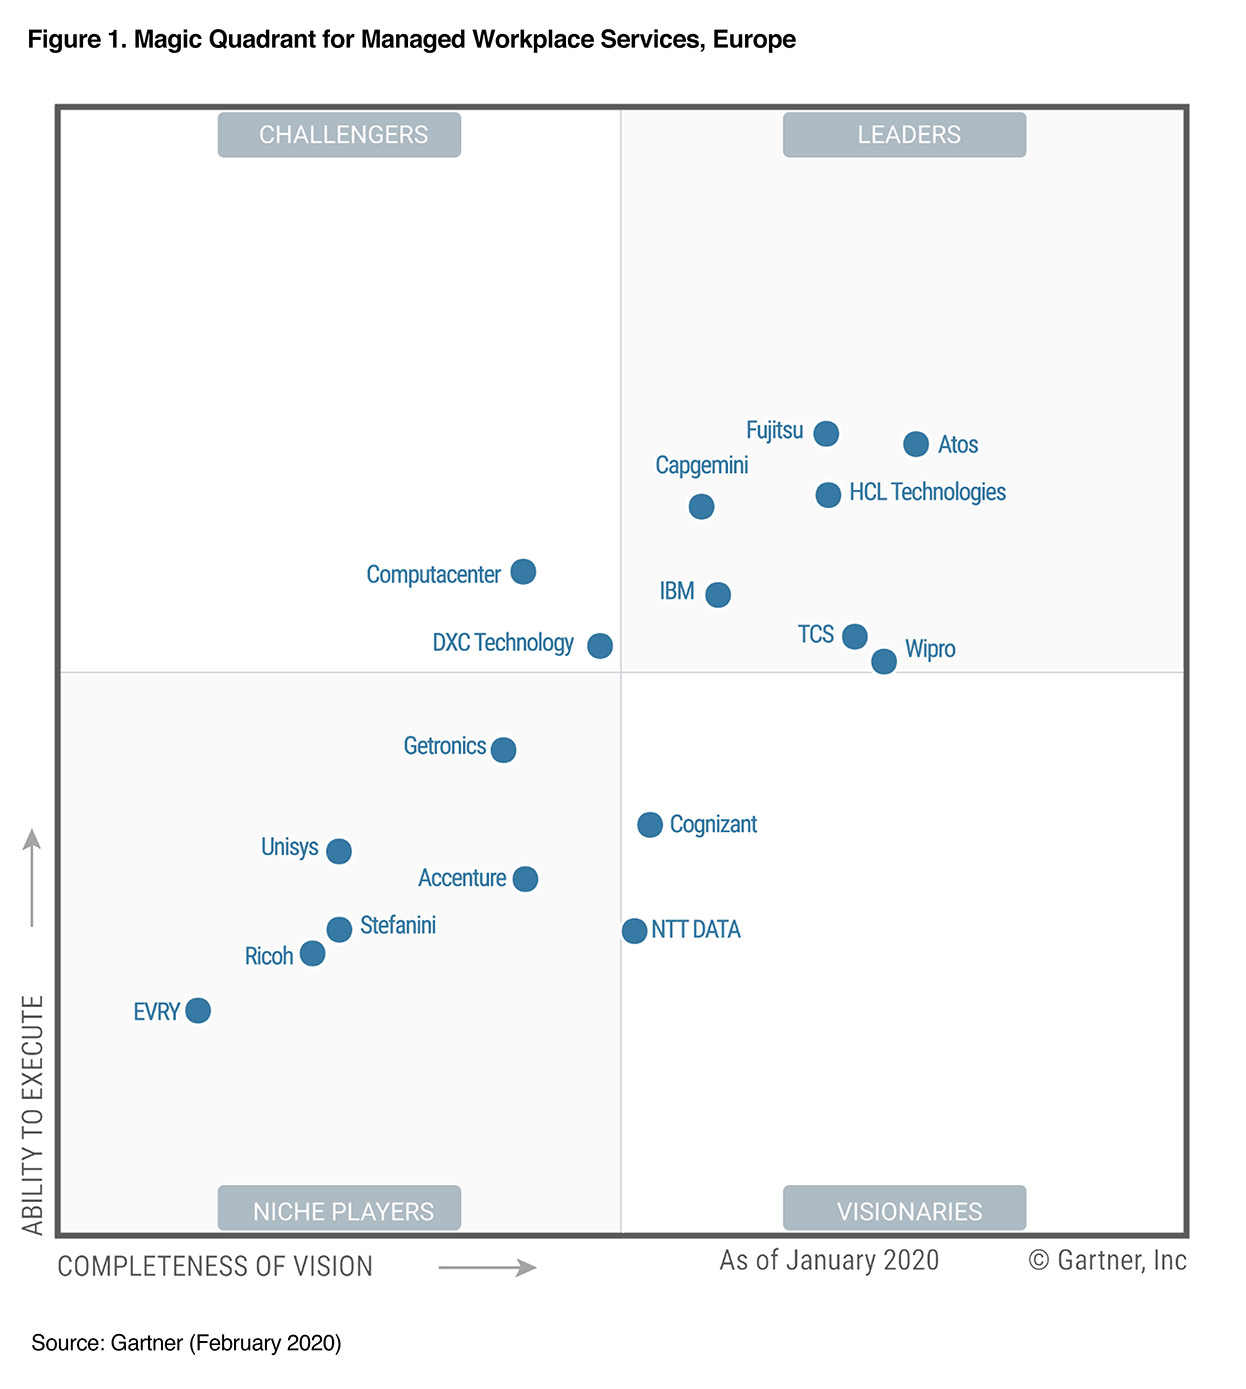 Wipro positioned as a Leader in 2020 Magic Quadrant for Managed Workplace Services, Europe